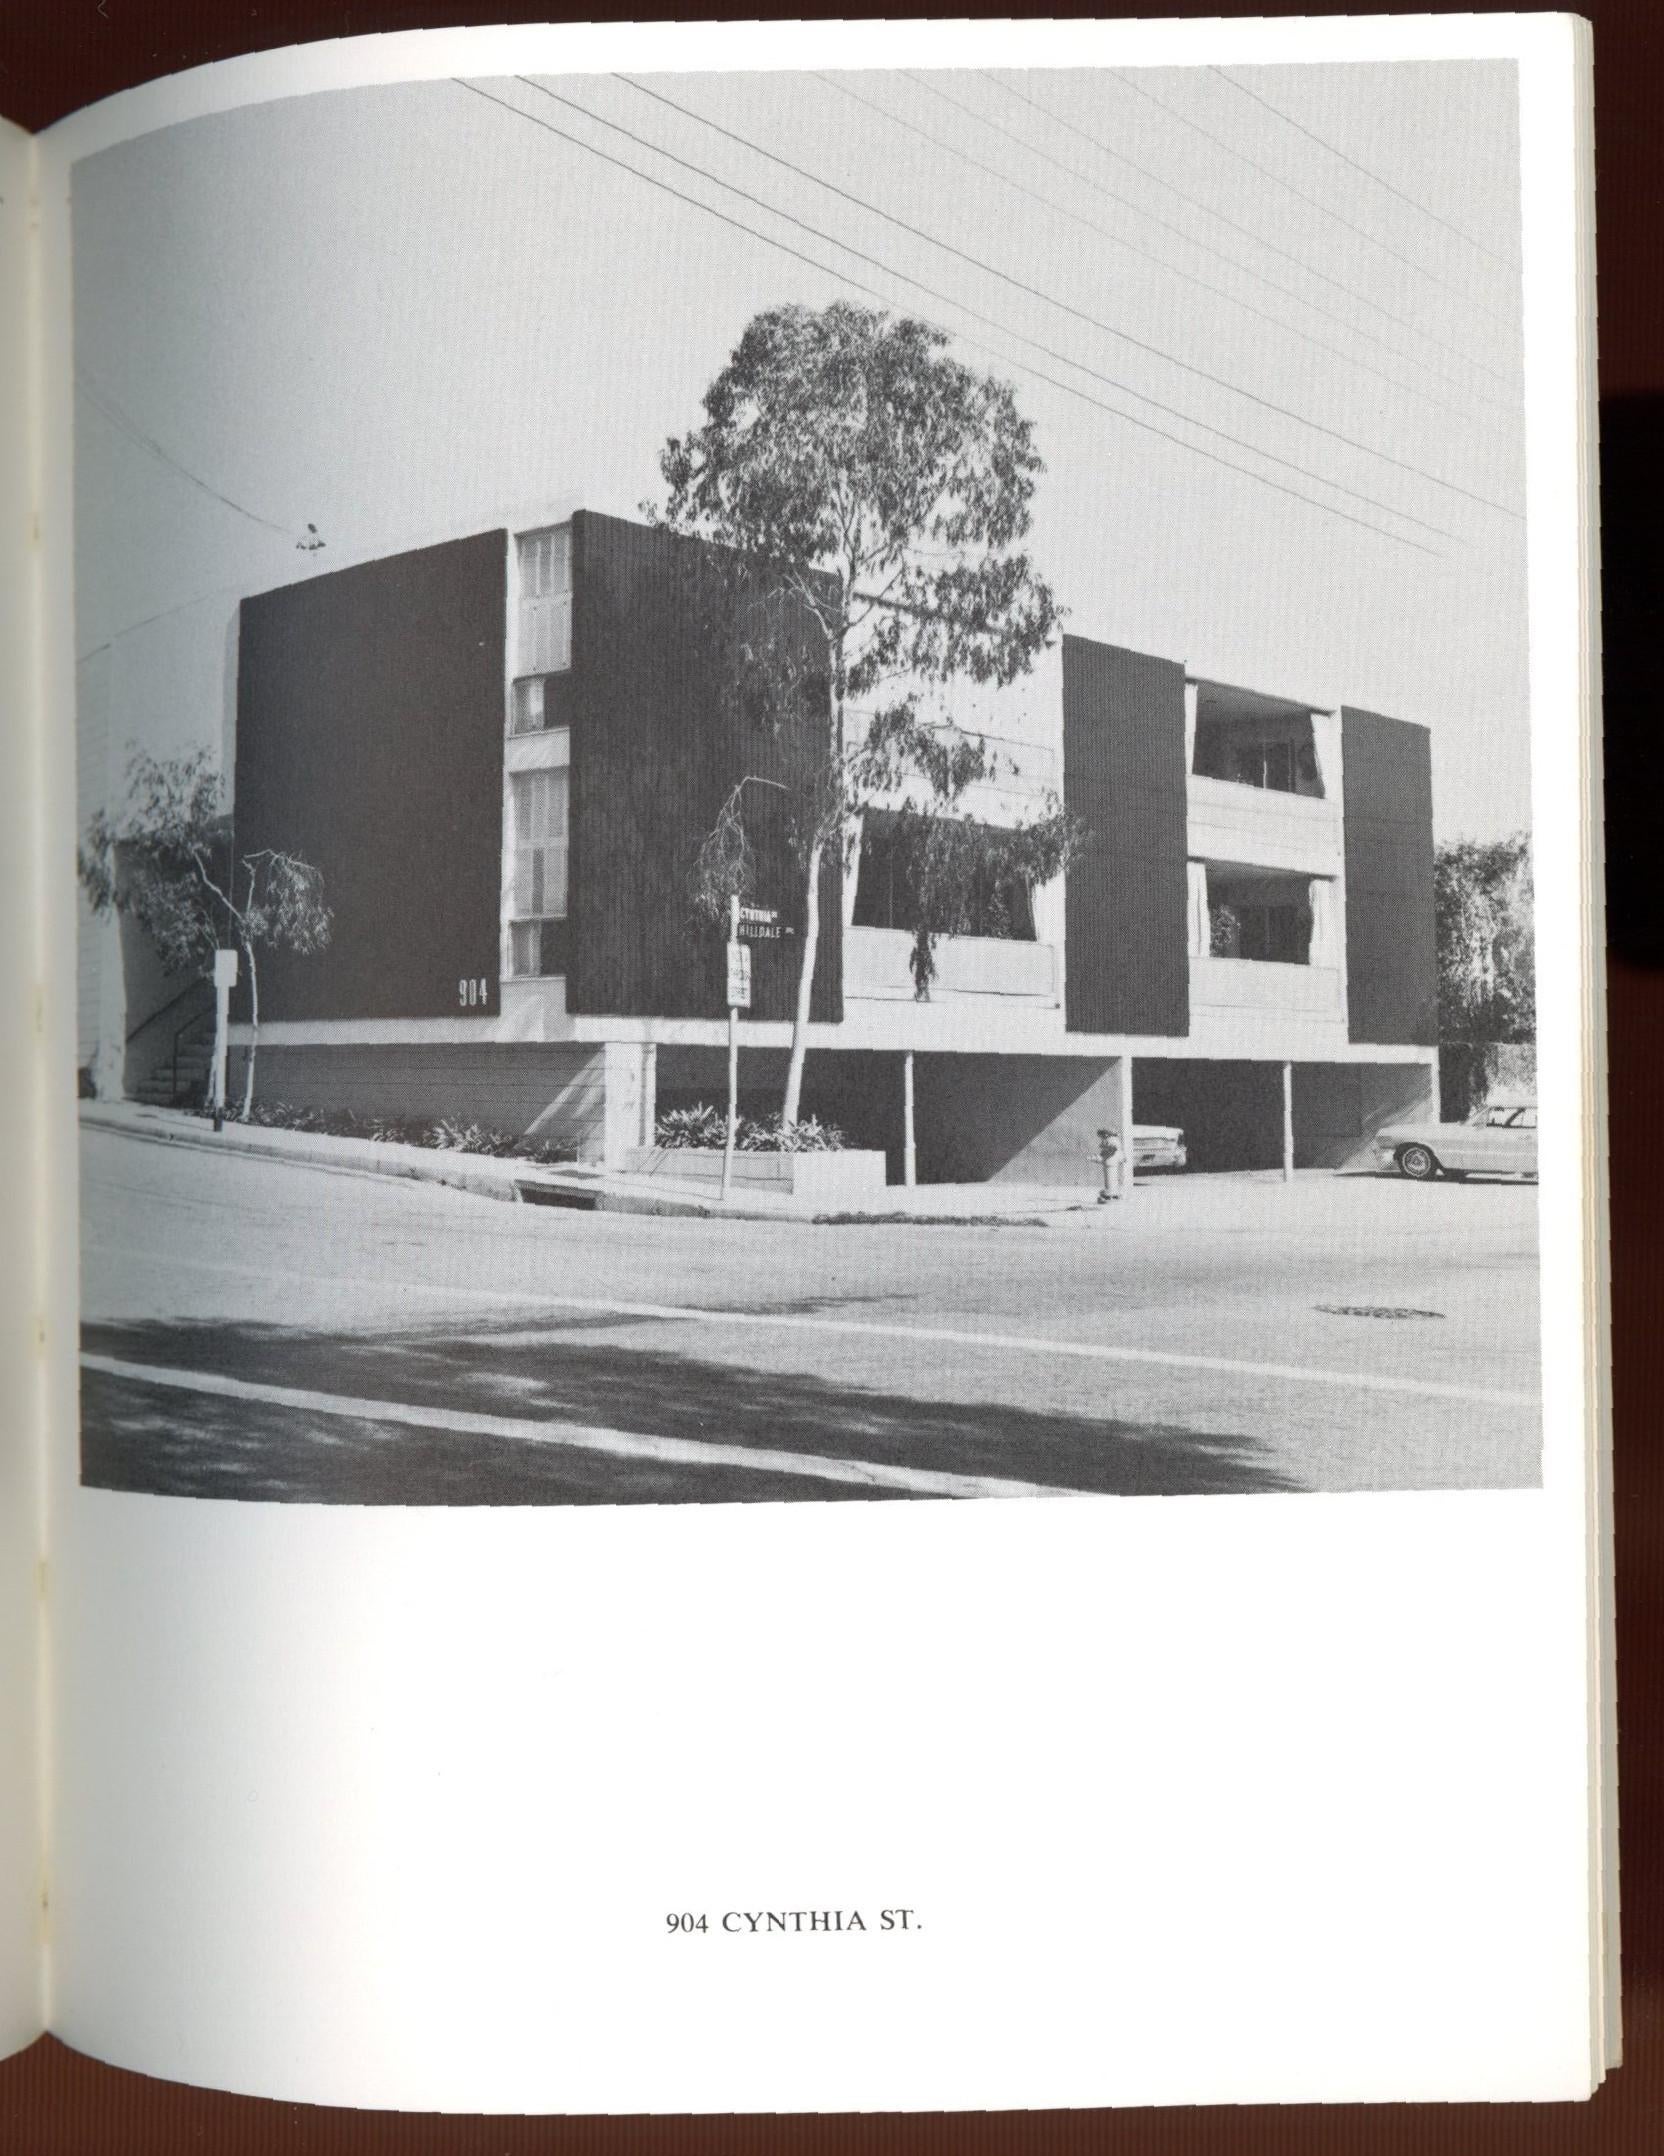 Ed Ruscha
Some Los Angeles Apartments, 1970
Softback monograph with stiff wraps
Second Edition Limited Edition of 3000 (the first edition in 1968 was 700)
Not Signed
7 × 5 1/2 inches
Another example of this limited edition artists book was exhibited